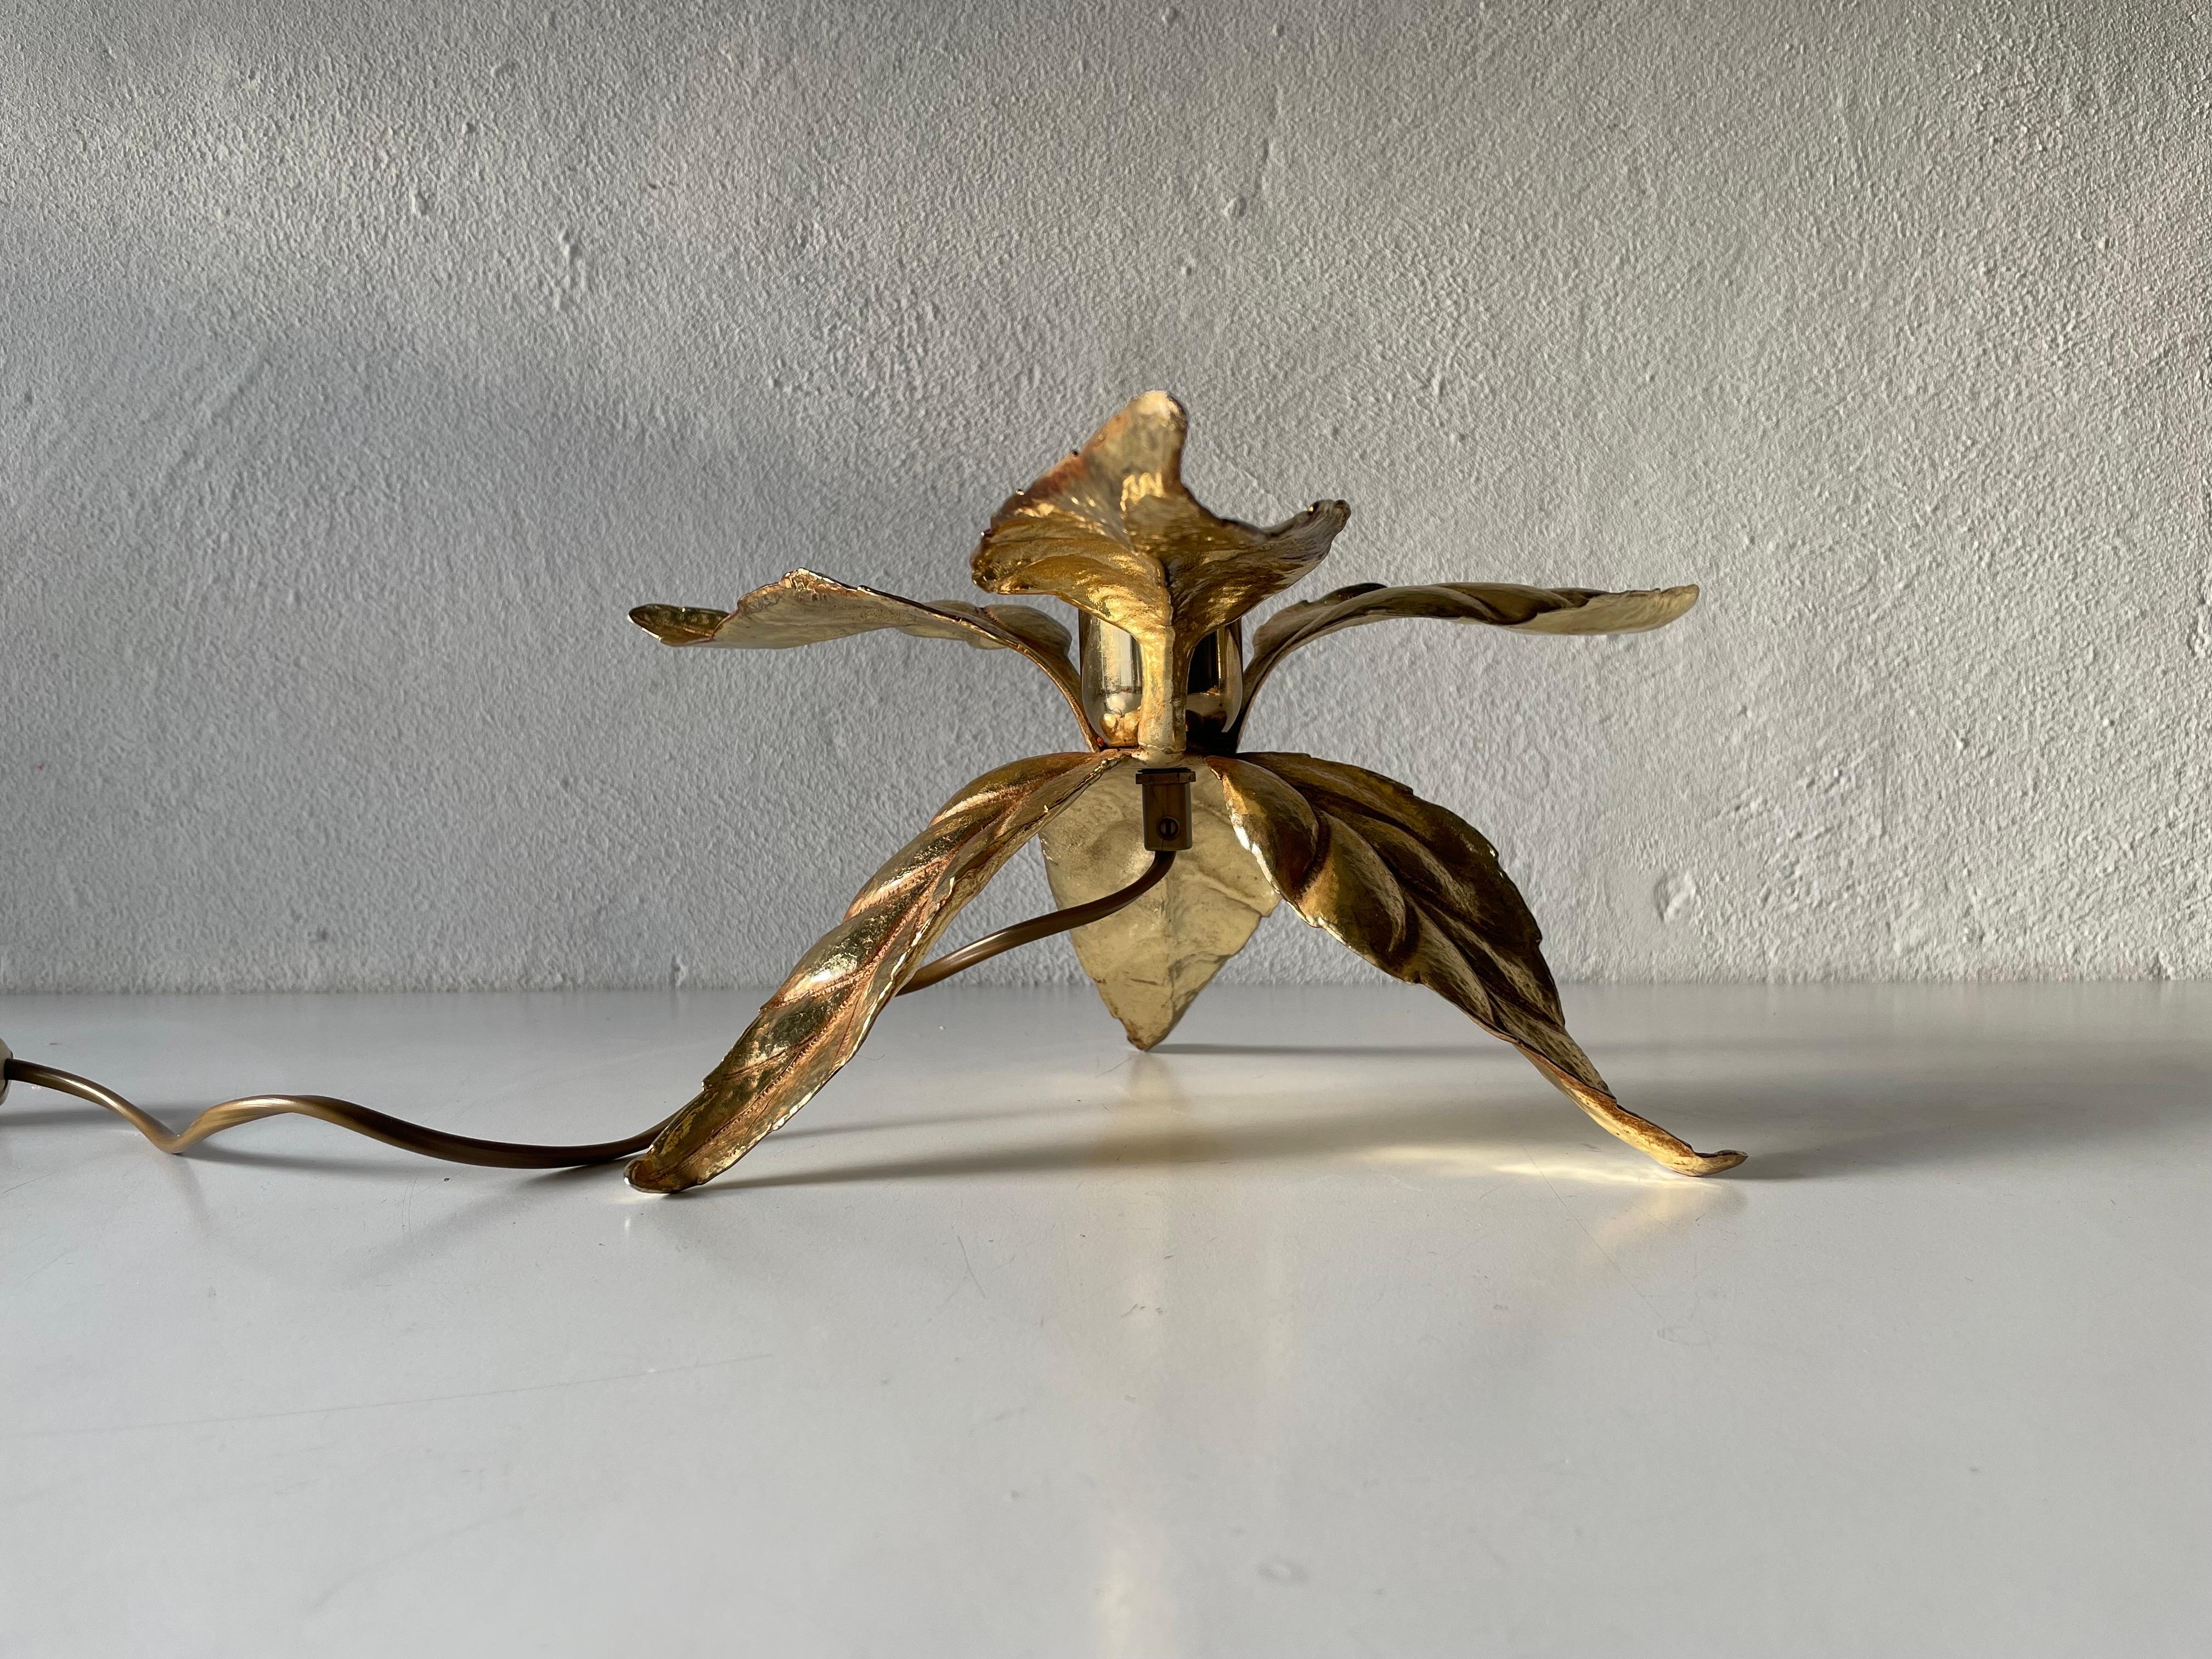 Multiple leaf design brass table lamp by Willy Daro for Massive, 1960s, Germany

Minimal and natural design
Very high quality.
Fully functional.
Original cable and plug. These lamps are suitable for EU plug socket. 

Lamps are in very good vintage